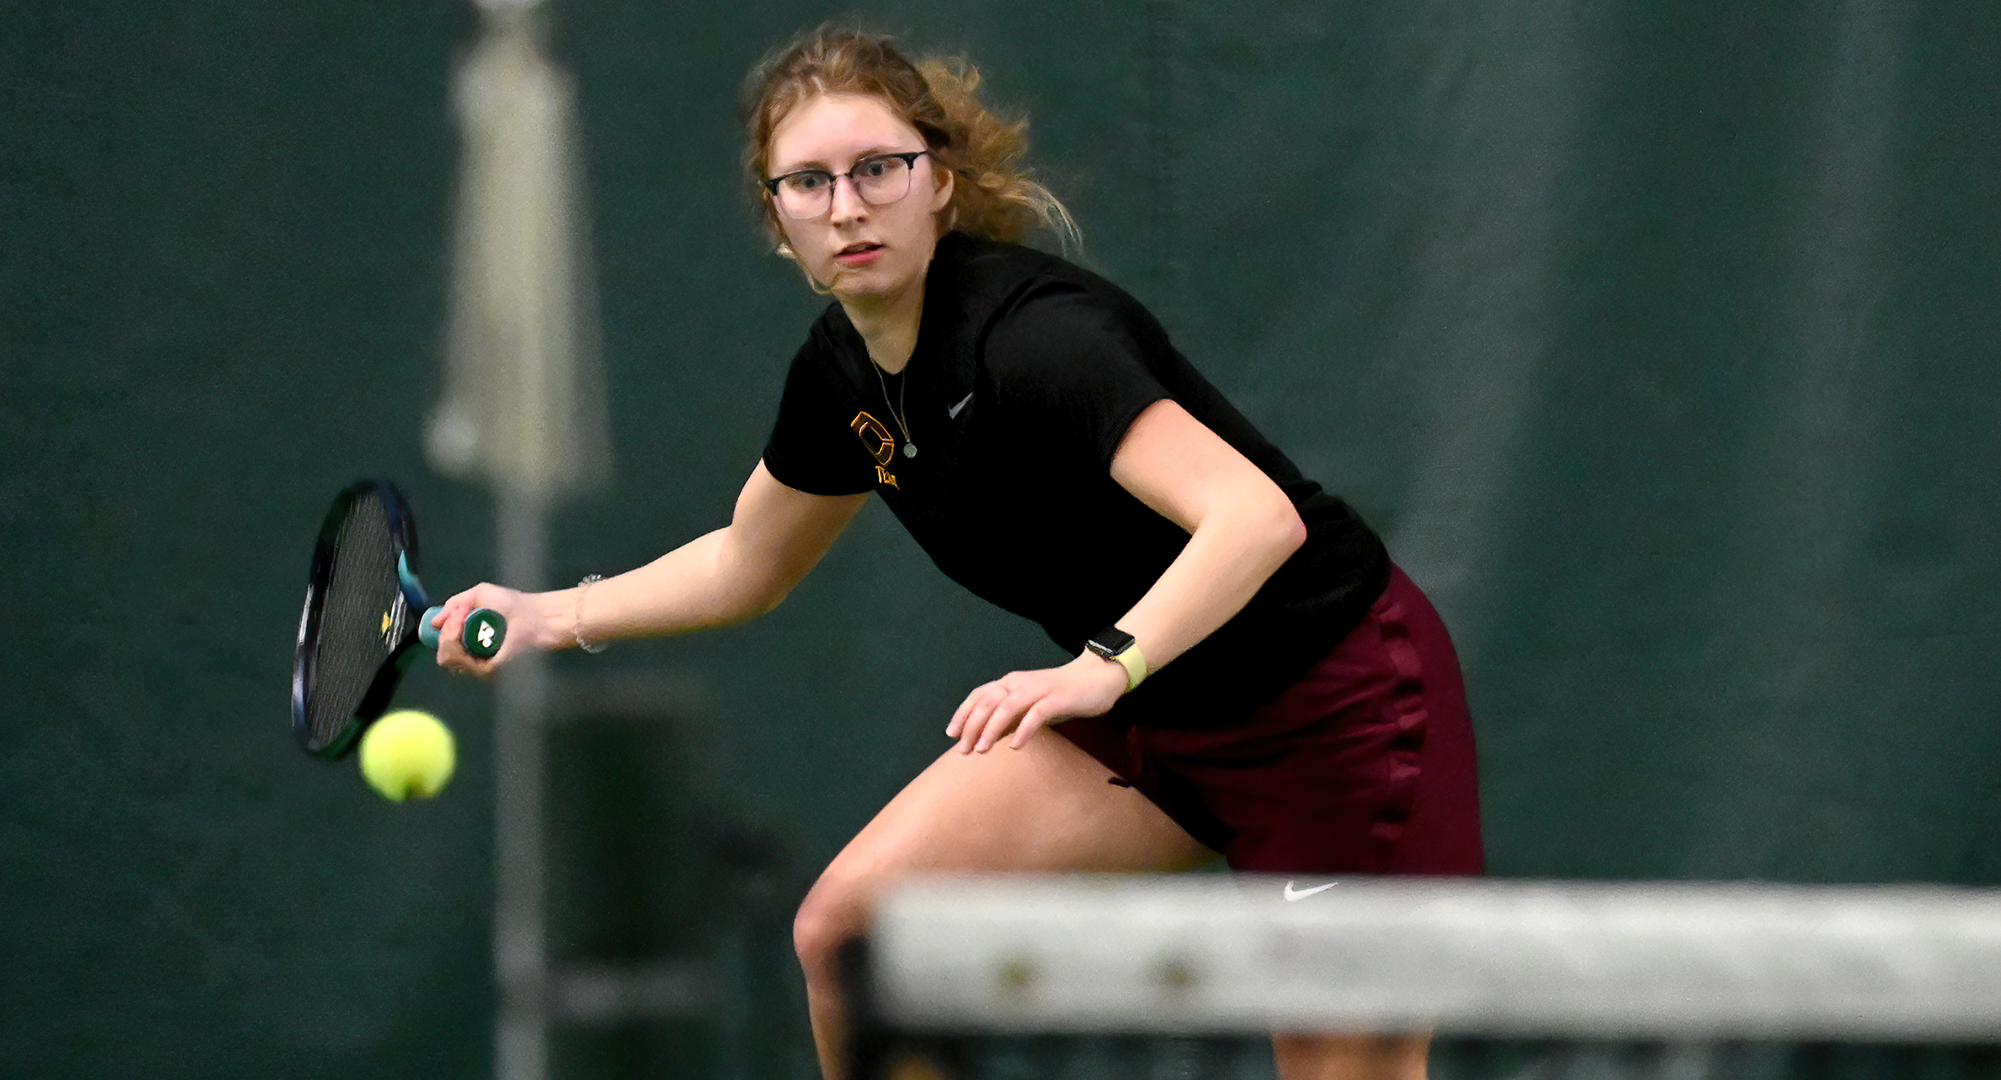 Senior Anna Hacker won the decisive singles match in the Cobbers' improbable comeback victory over Northwestern.